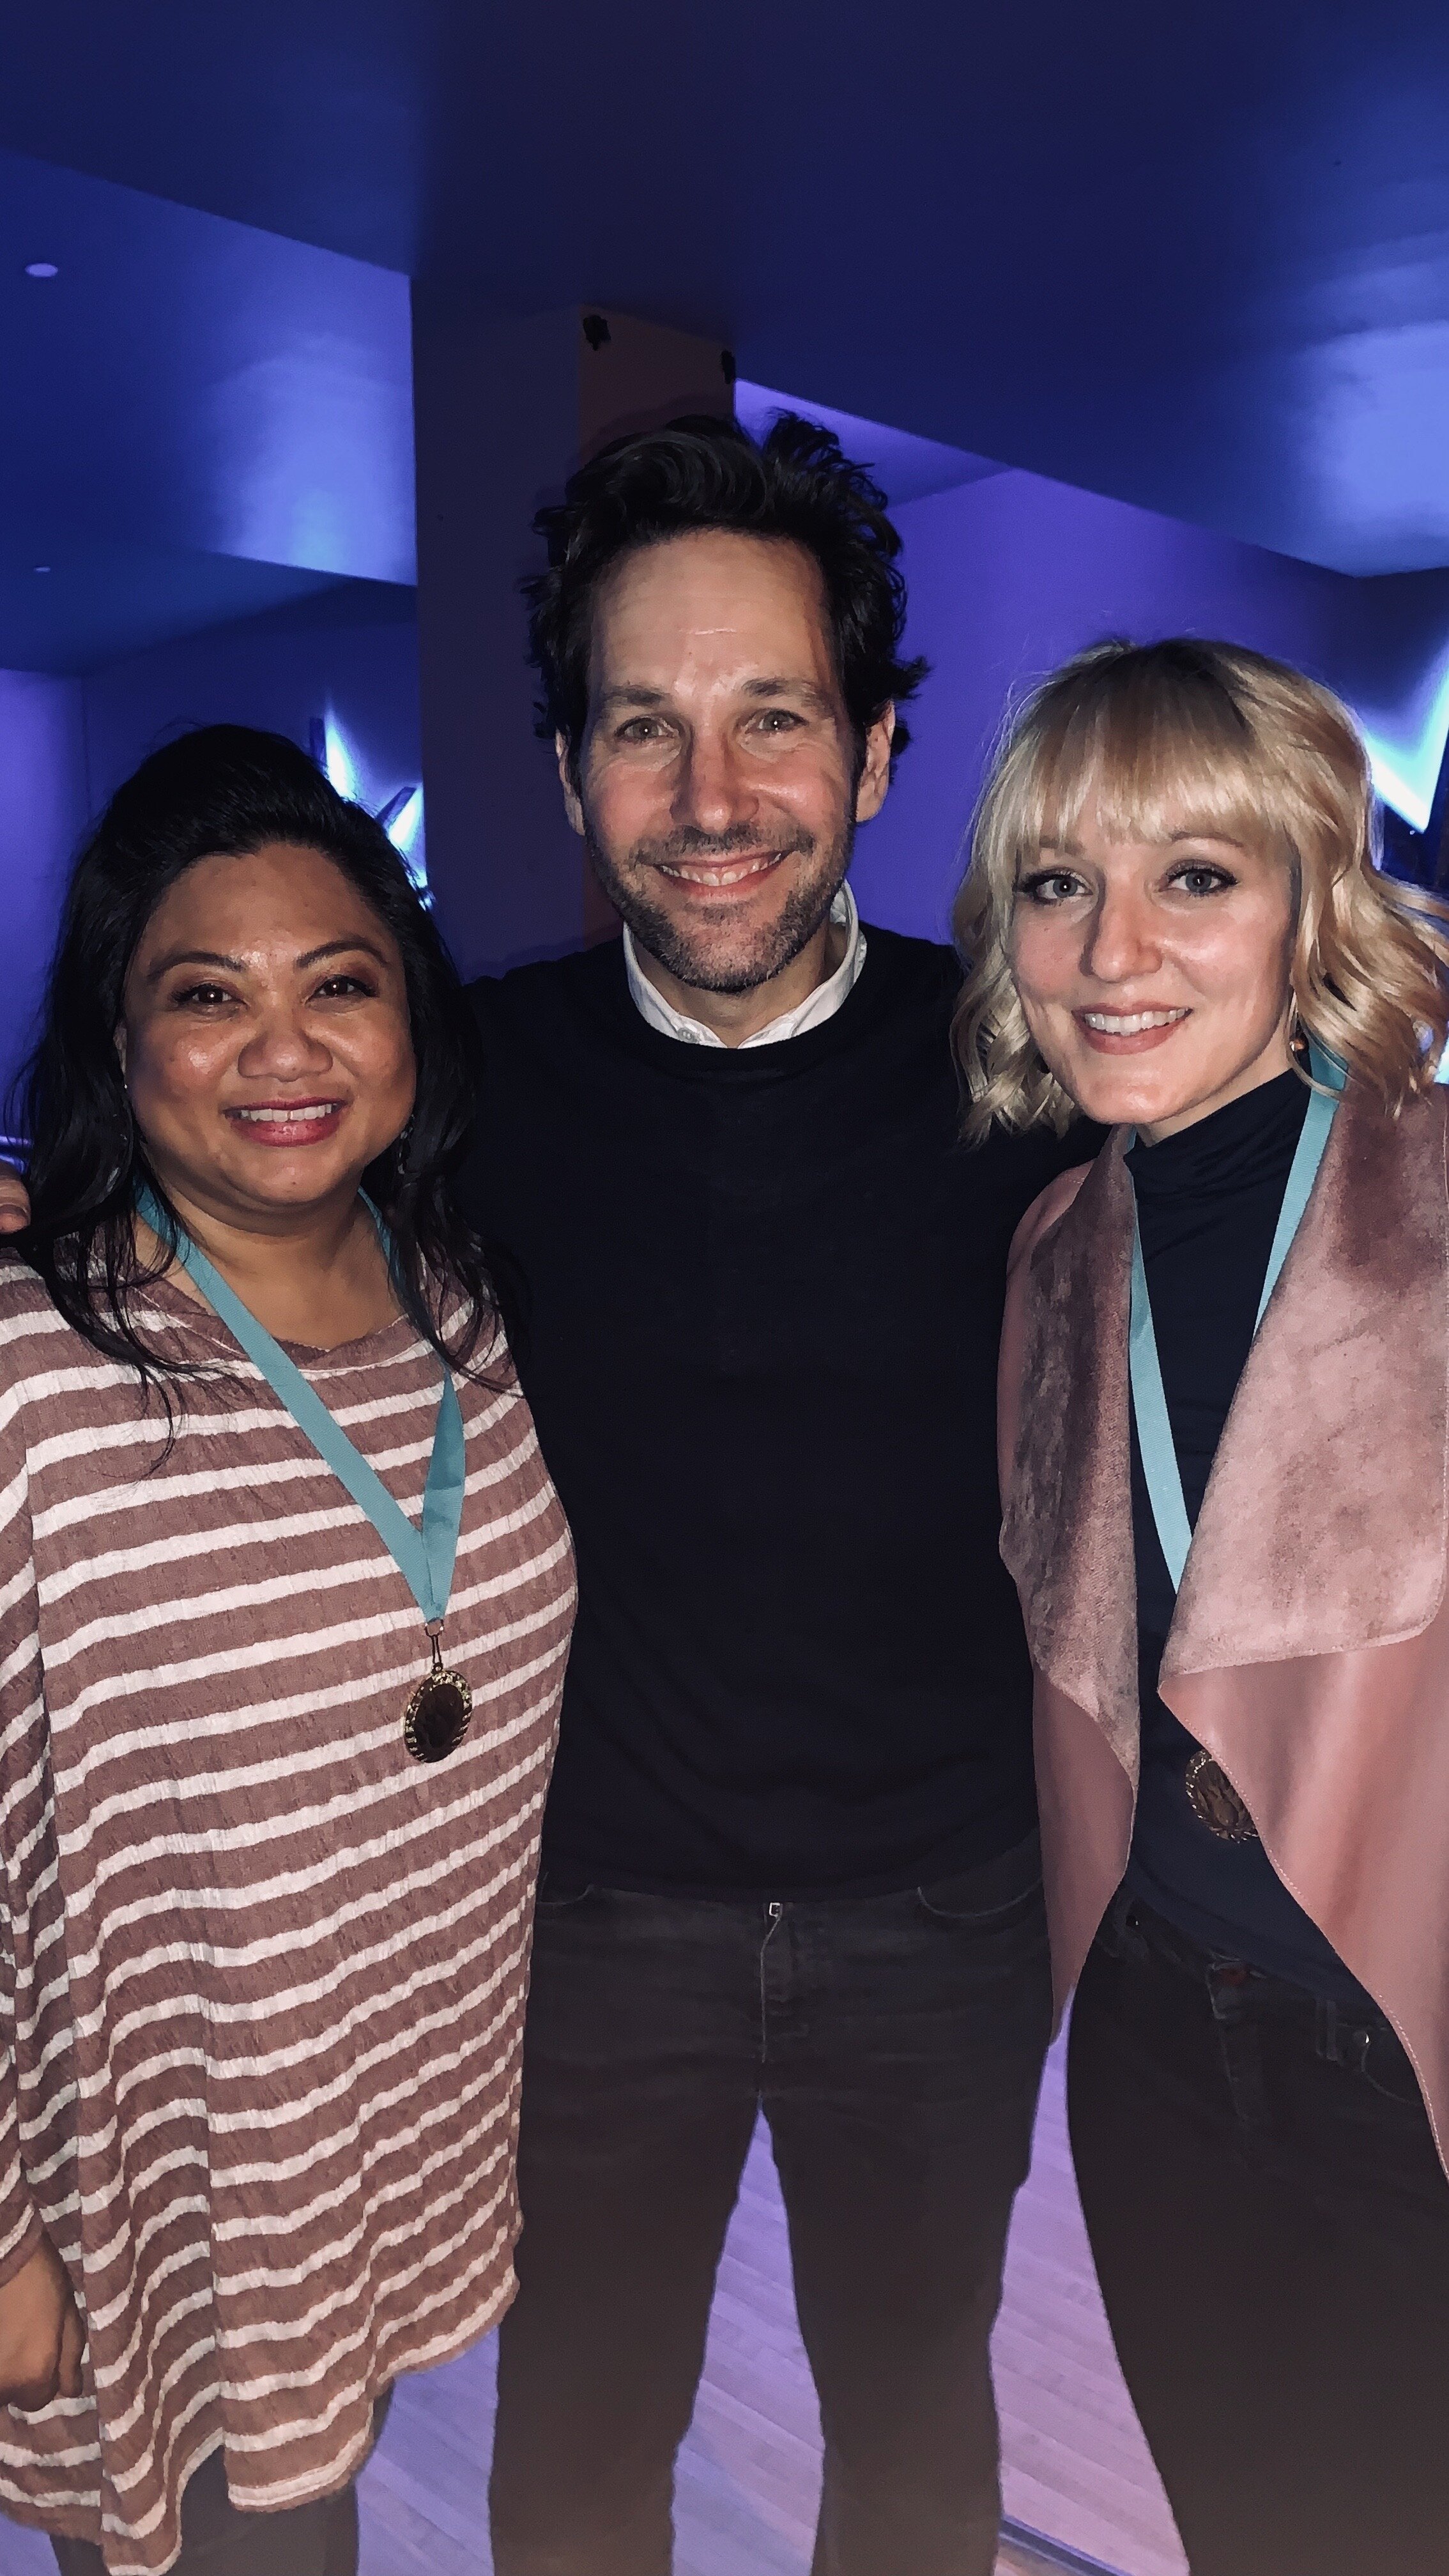 Lulu Picart and Alison Burns of 10K Dollar Day with Paul Rudd at #RuddBowling for SAY:The Stuttering Association for the Young 2019